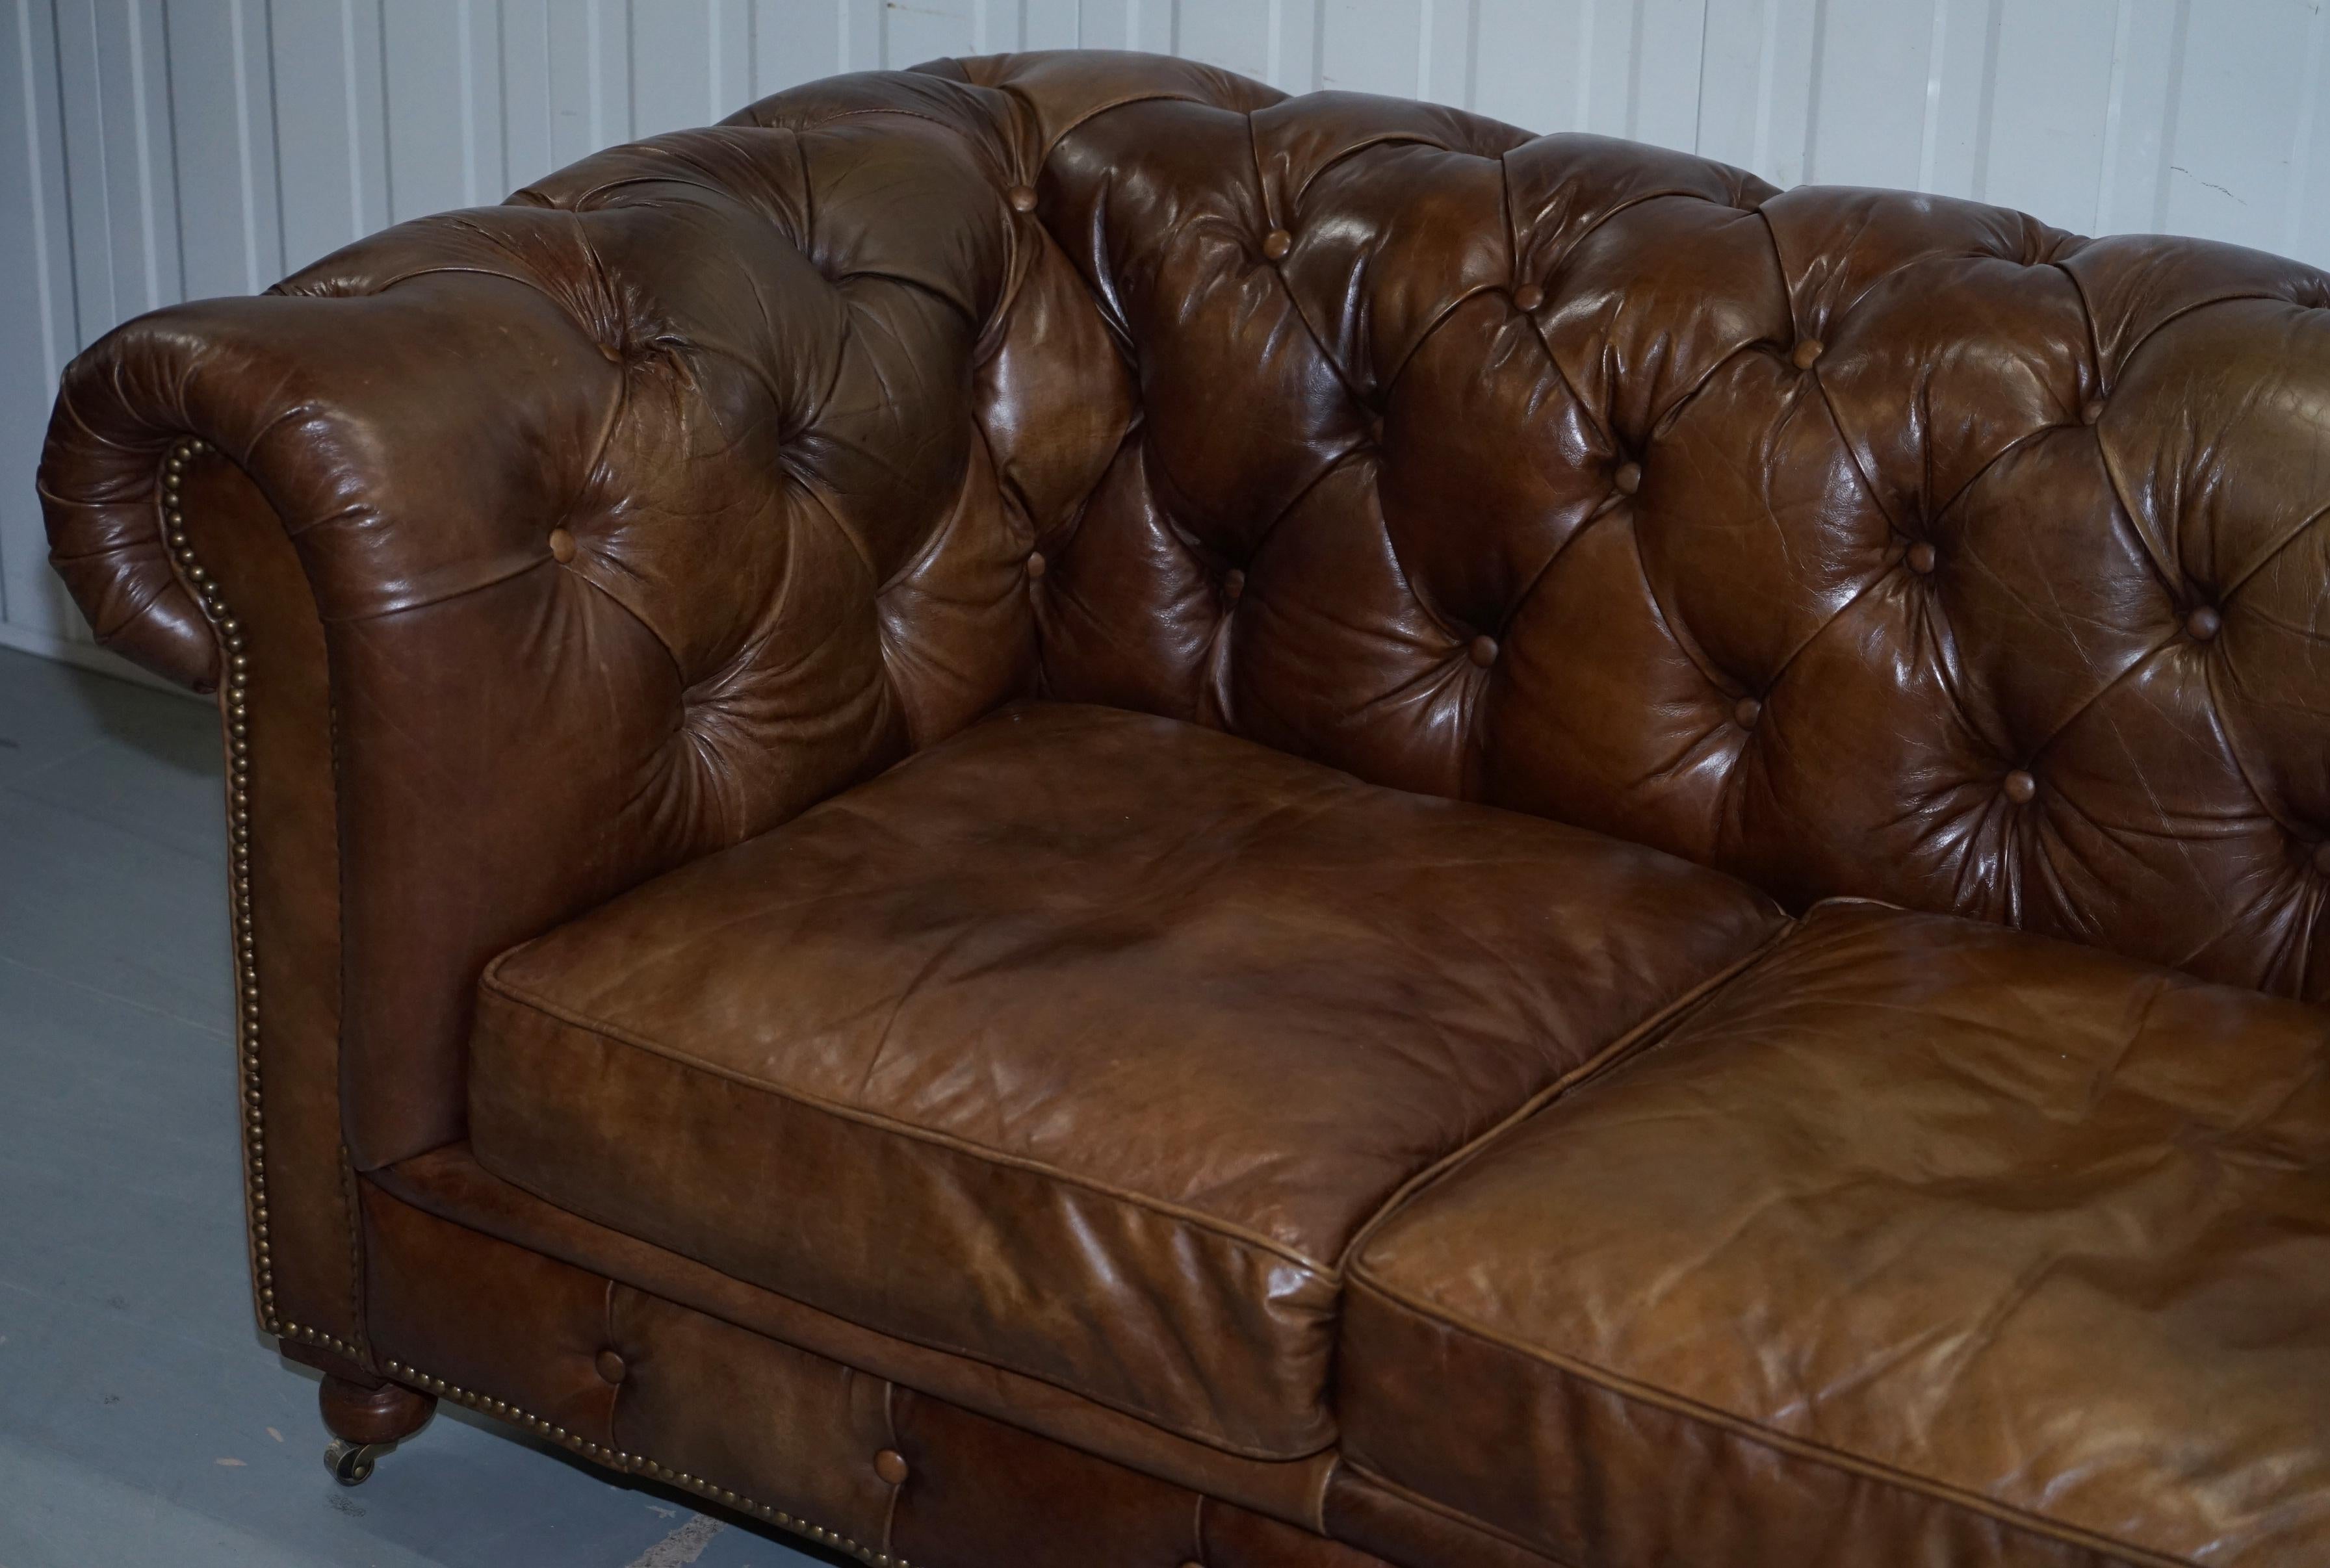 Modern 1 of 2 Timothy Oulton Halo Westminster Brown Leather Chesterfield Sofas